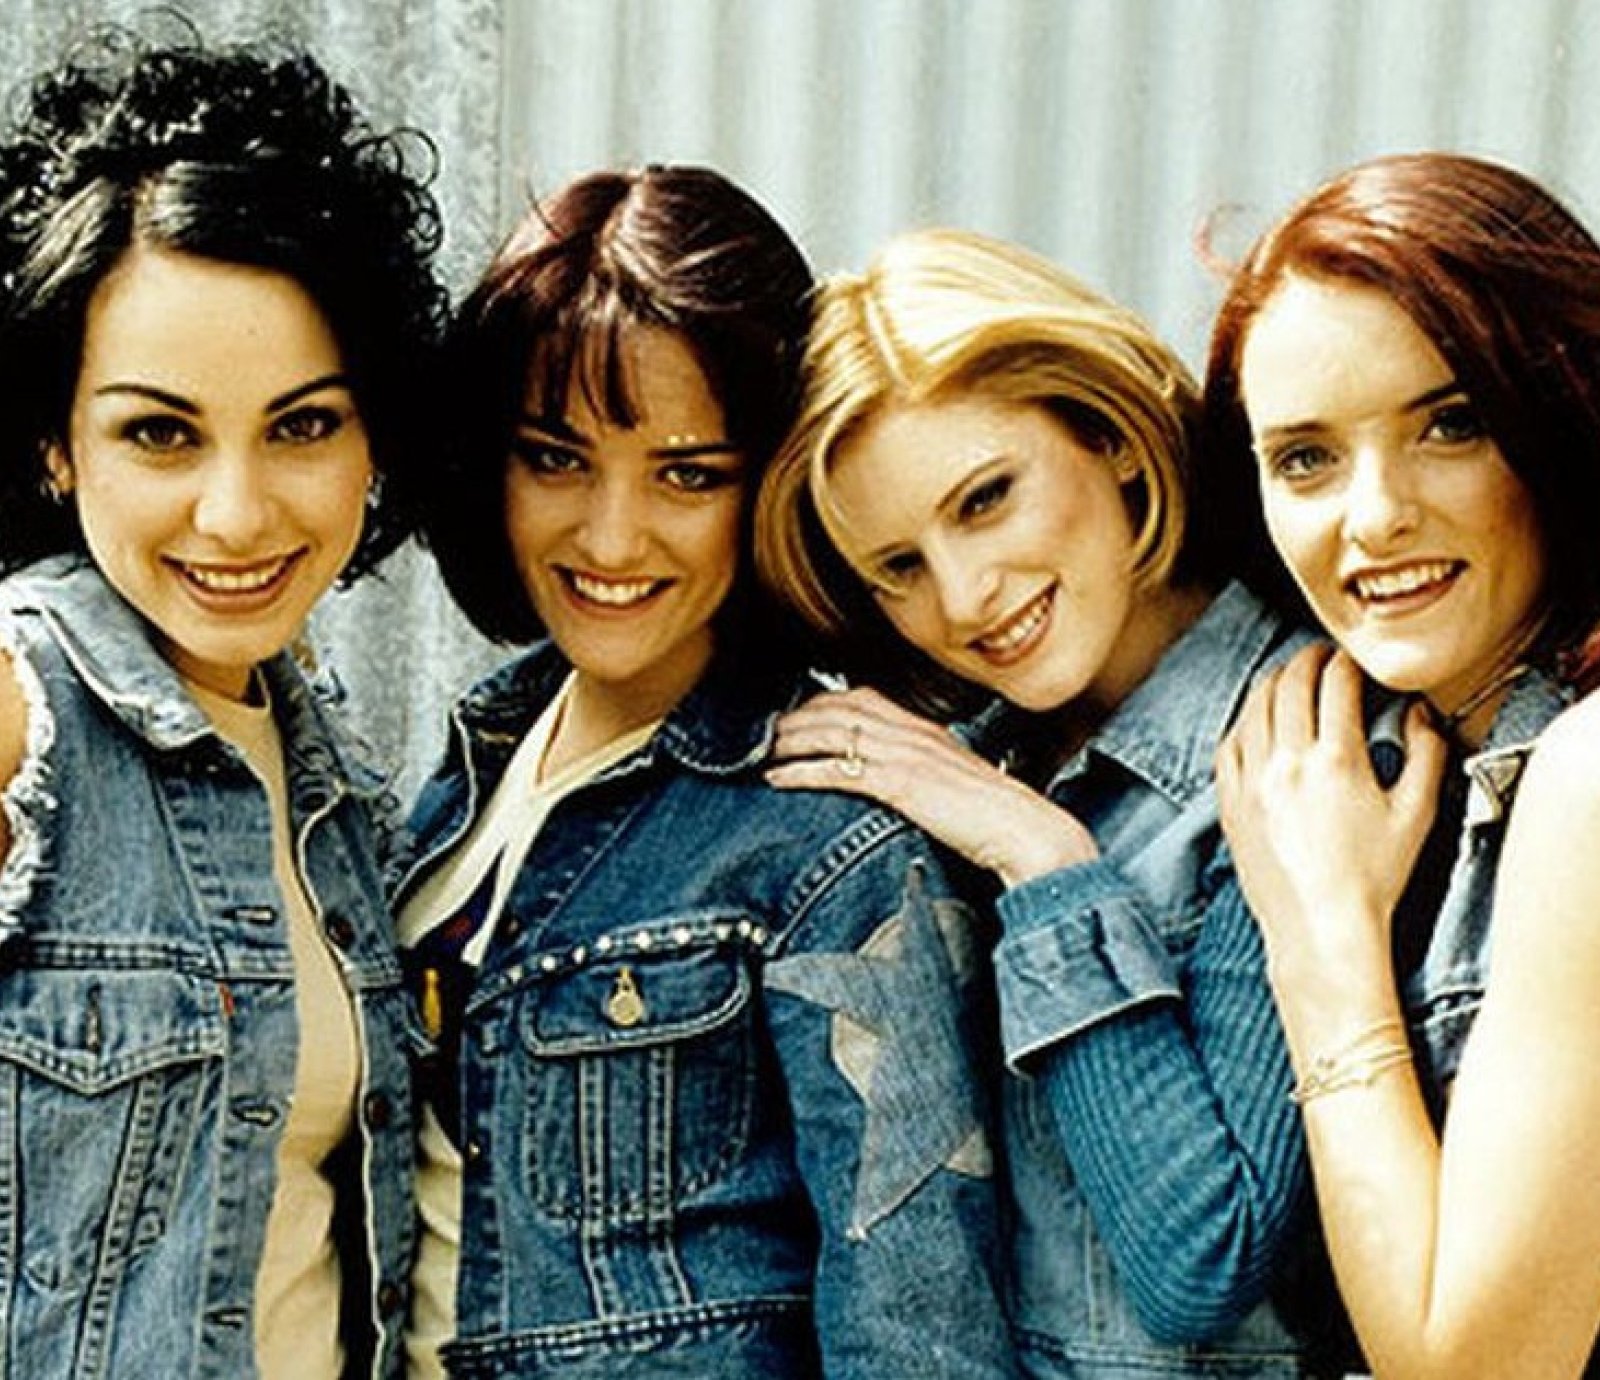 B*witched